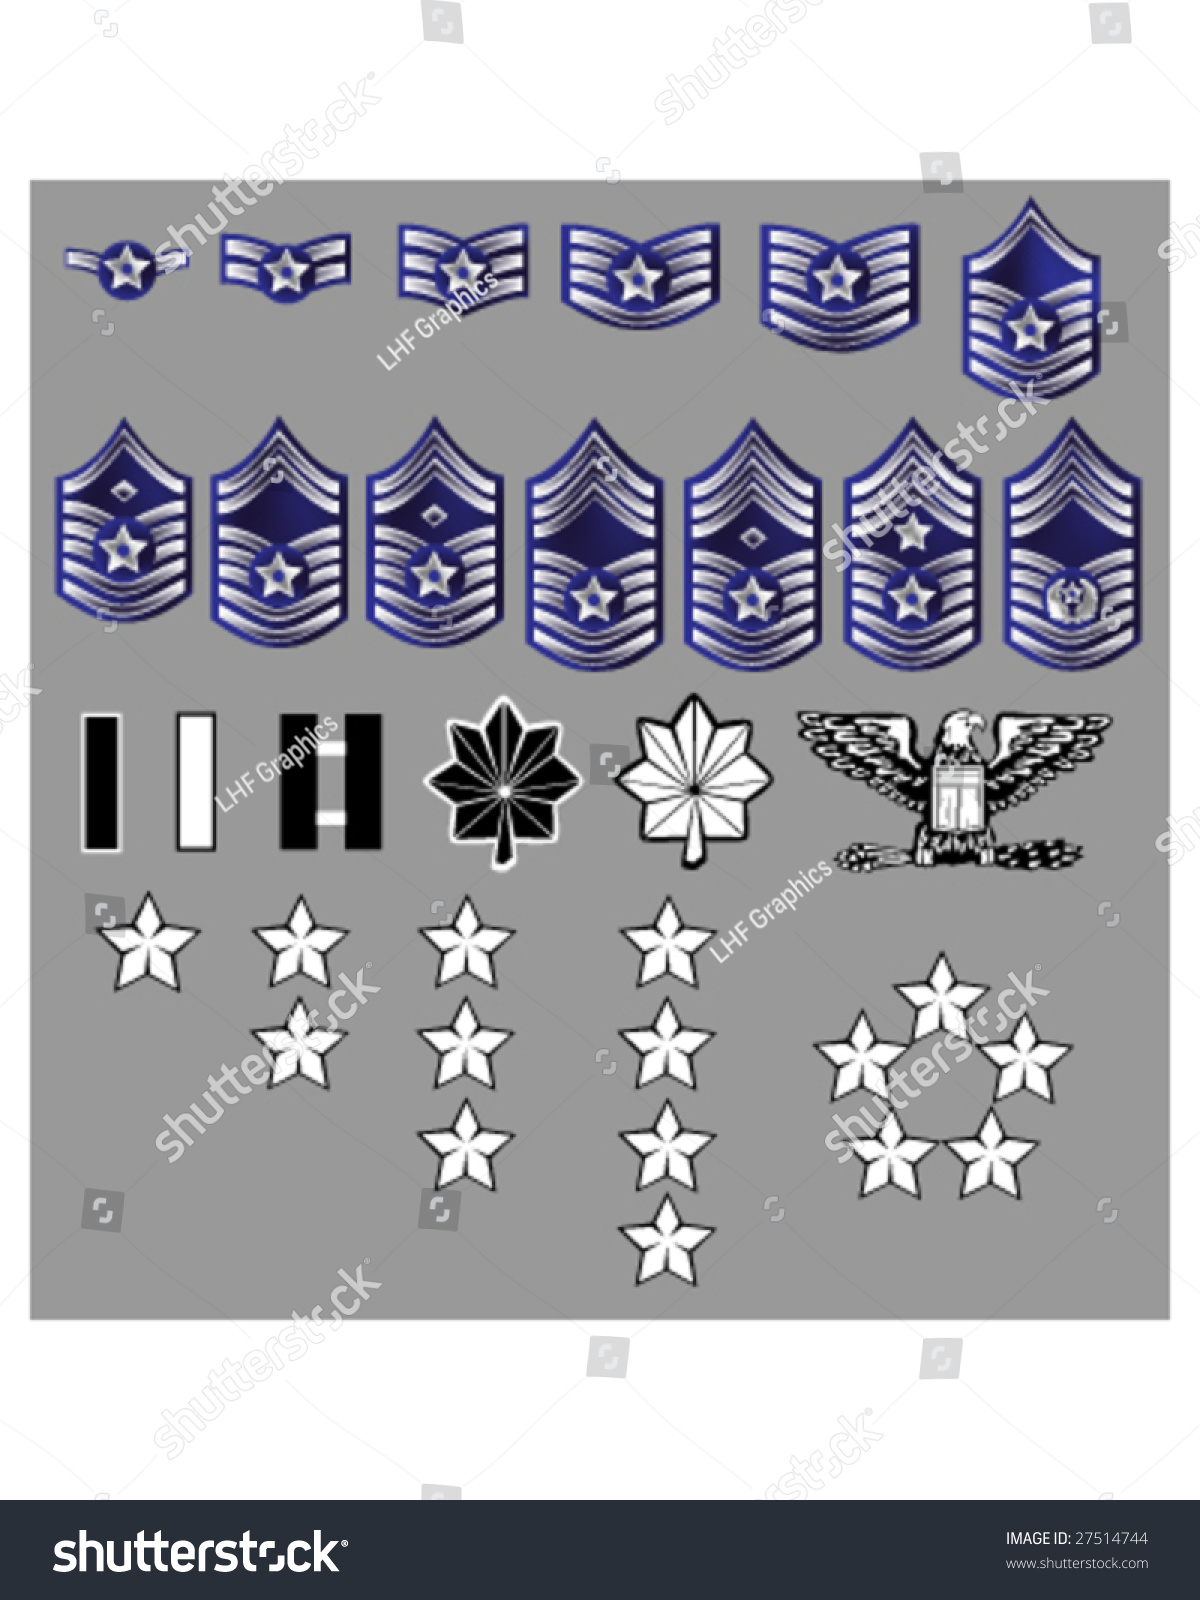 Us Air Force Rank Insignia For Officers And Enlisted In Vector Format